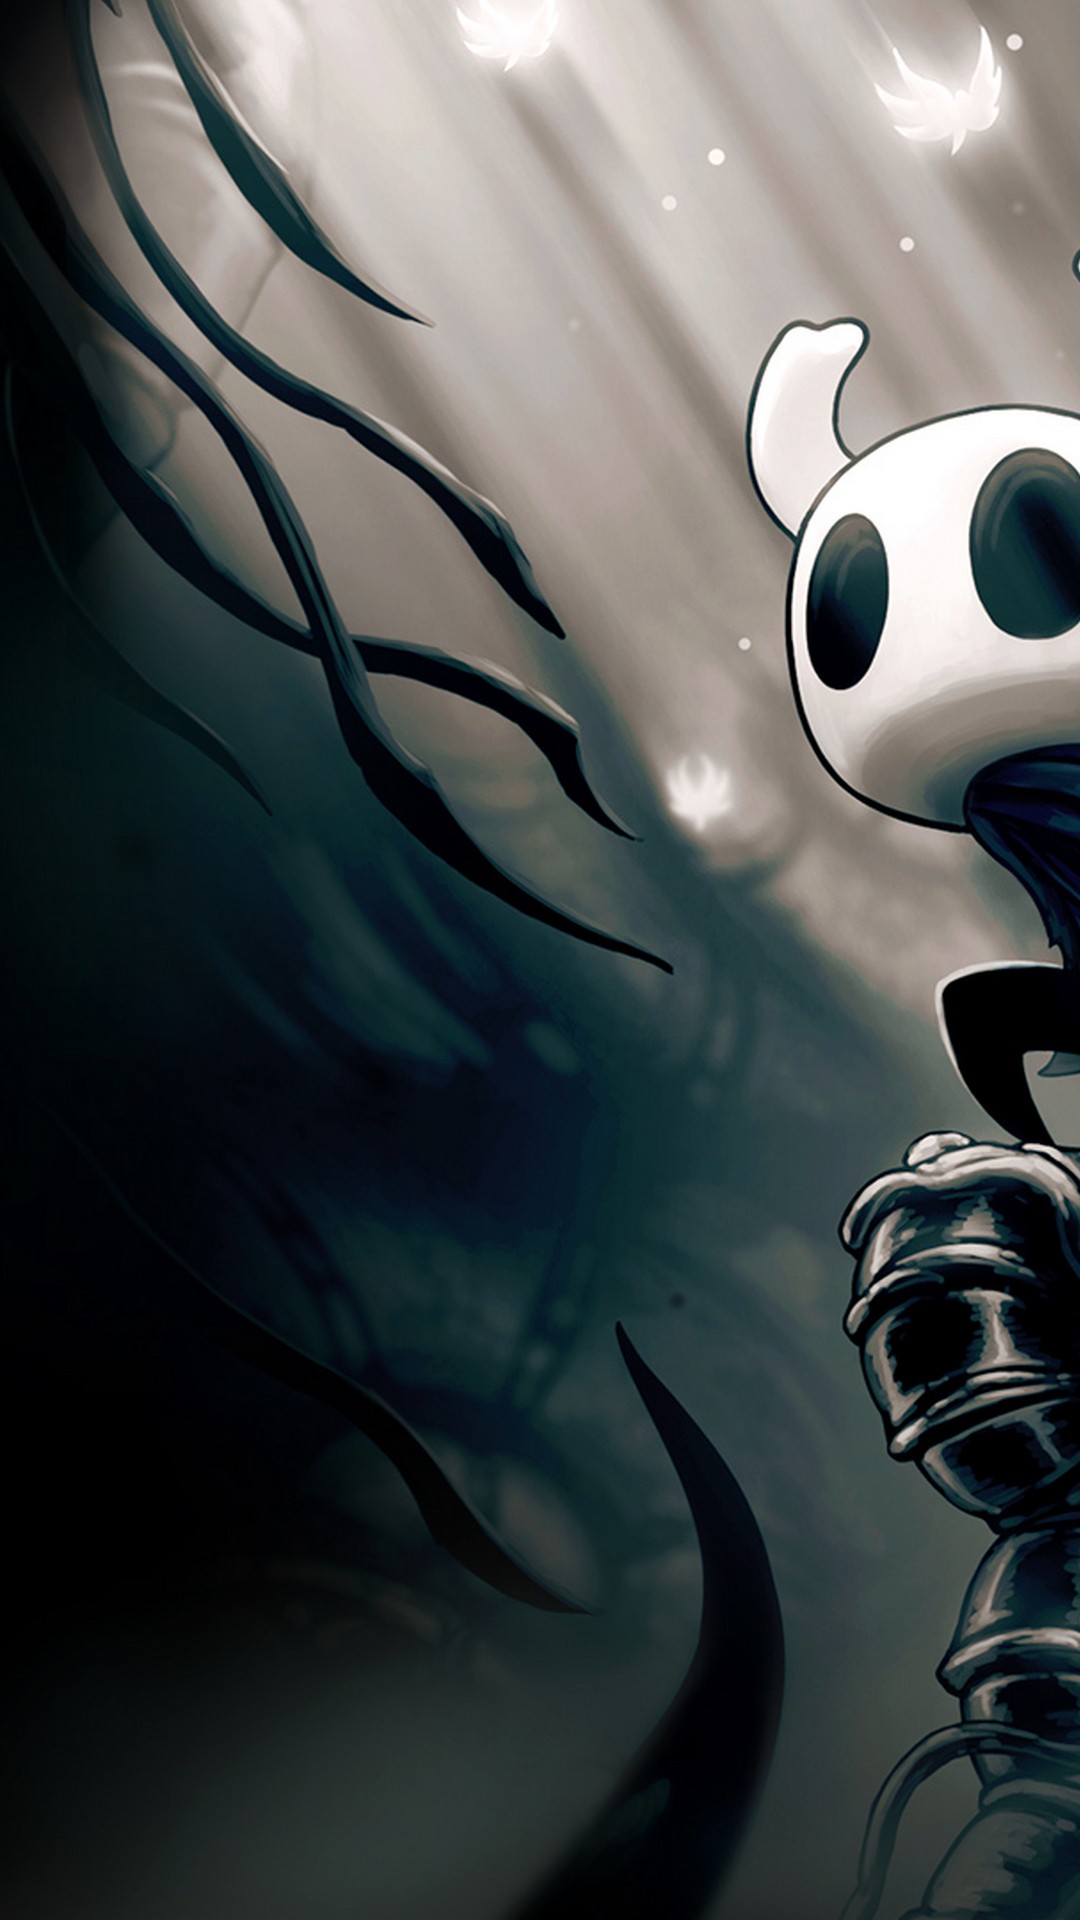 Hollow Knight Wallpaper For Phone HD with high-resolution 1080x1920 pixel. Download all Mobile Wallpapers and Use them as wallpapers for your iPhone, Tablet, iPad, Android and other mobile devices